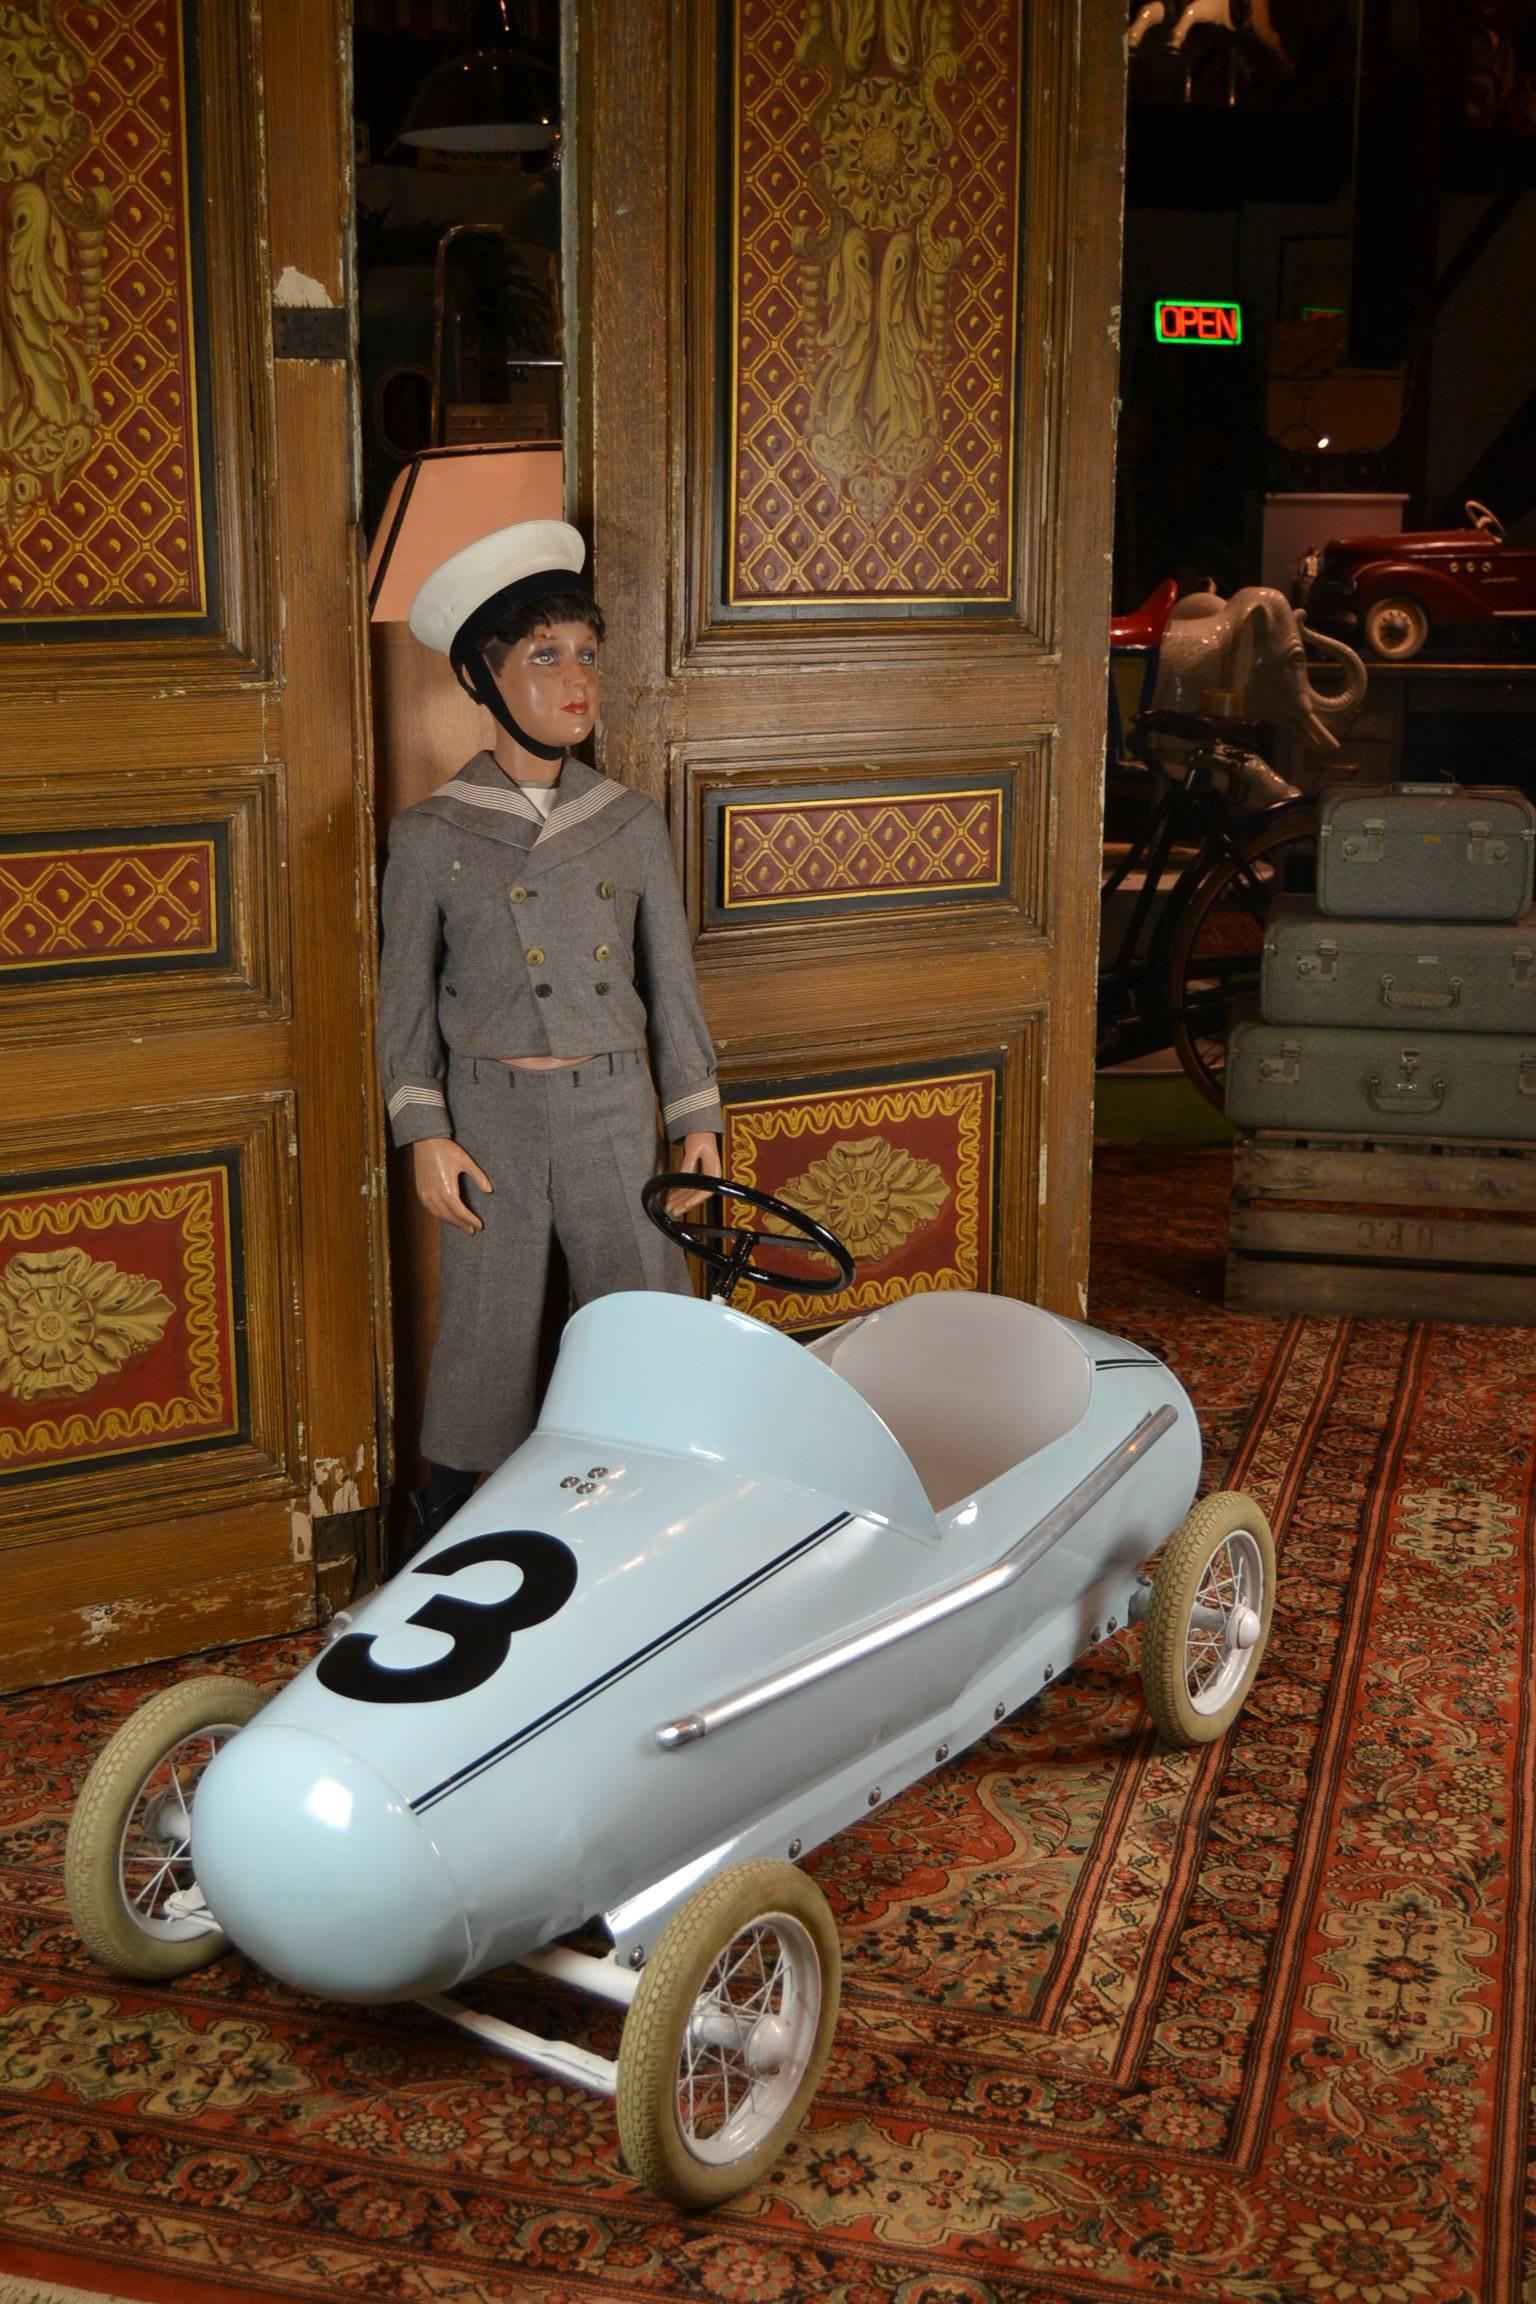 Exceptional huge Racer Pedal Car.
A big heavy solid metal pedal with chain drive car made by Torck, 
a famous Belgian Toy Factory. 
It was handmade in the 1950s and still in very good used condition.
Those days this type of pedal cars were also